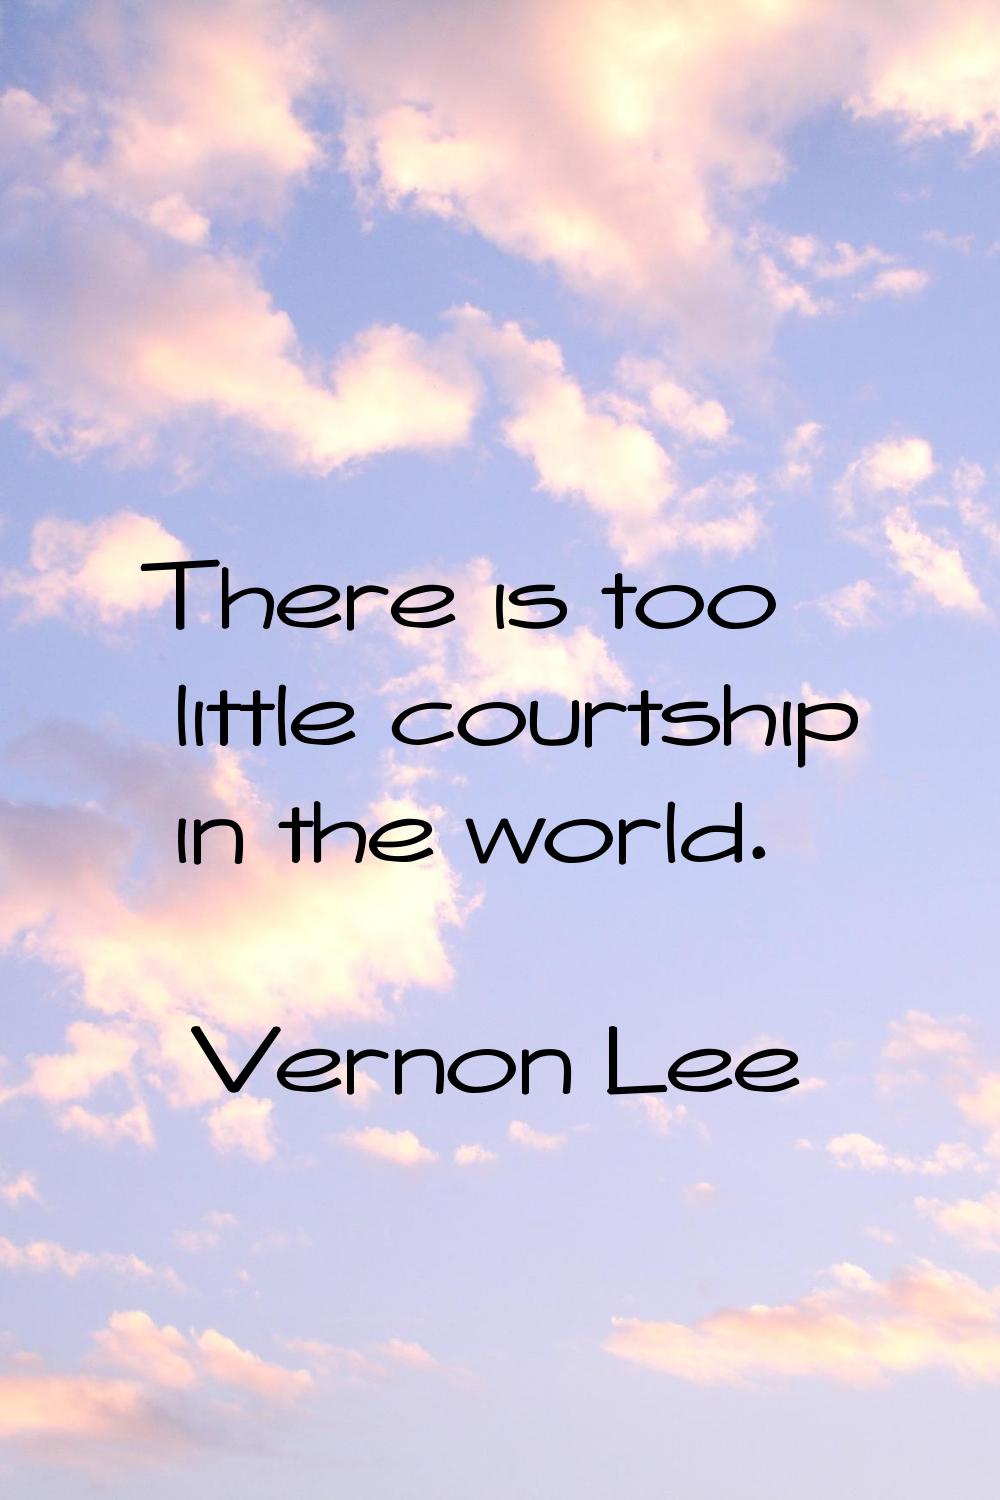 There is too little courtship in the world.